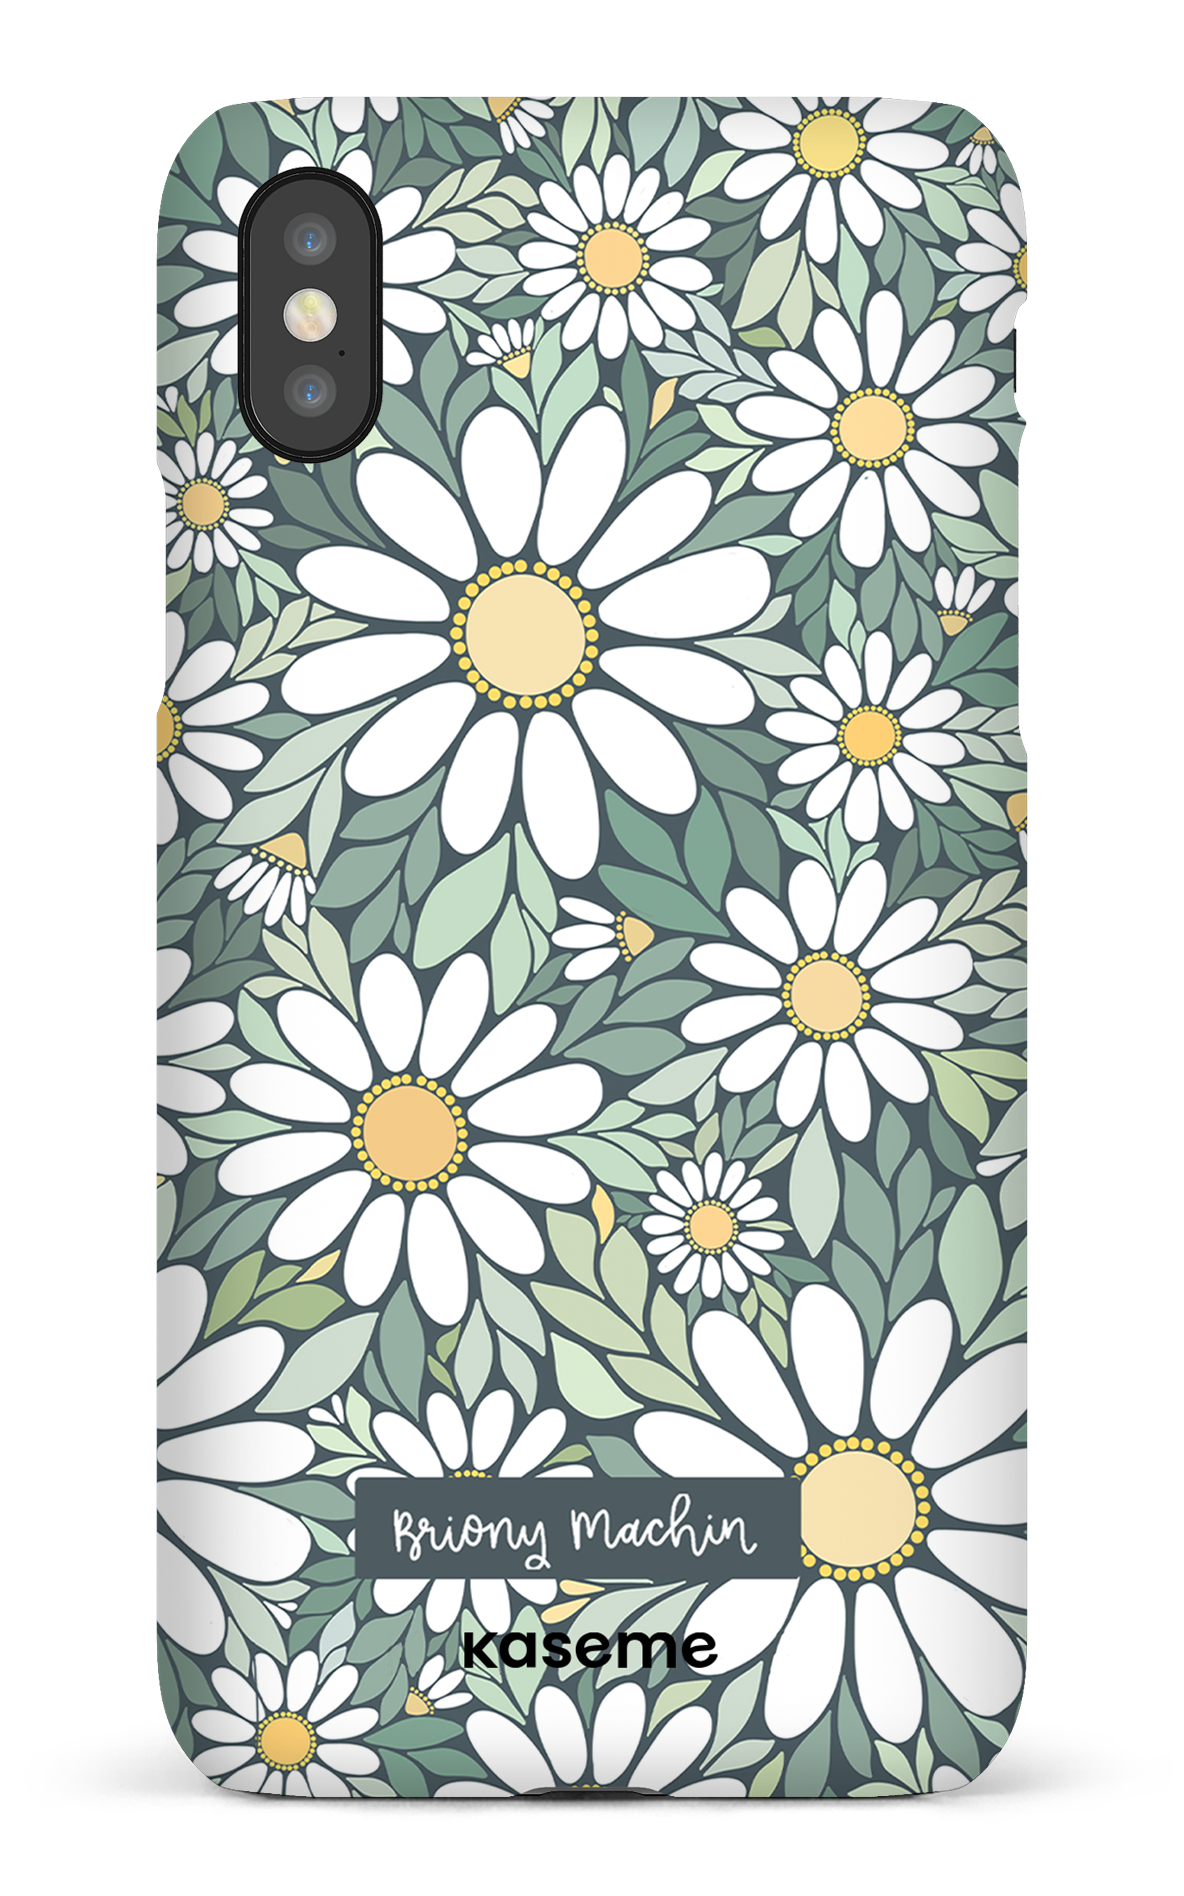 Daisy Blooms by Briony Machin - iPhone X/Xs